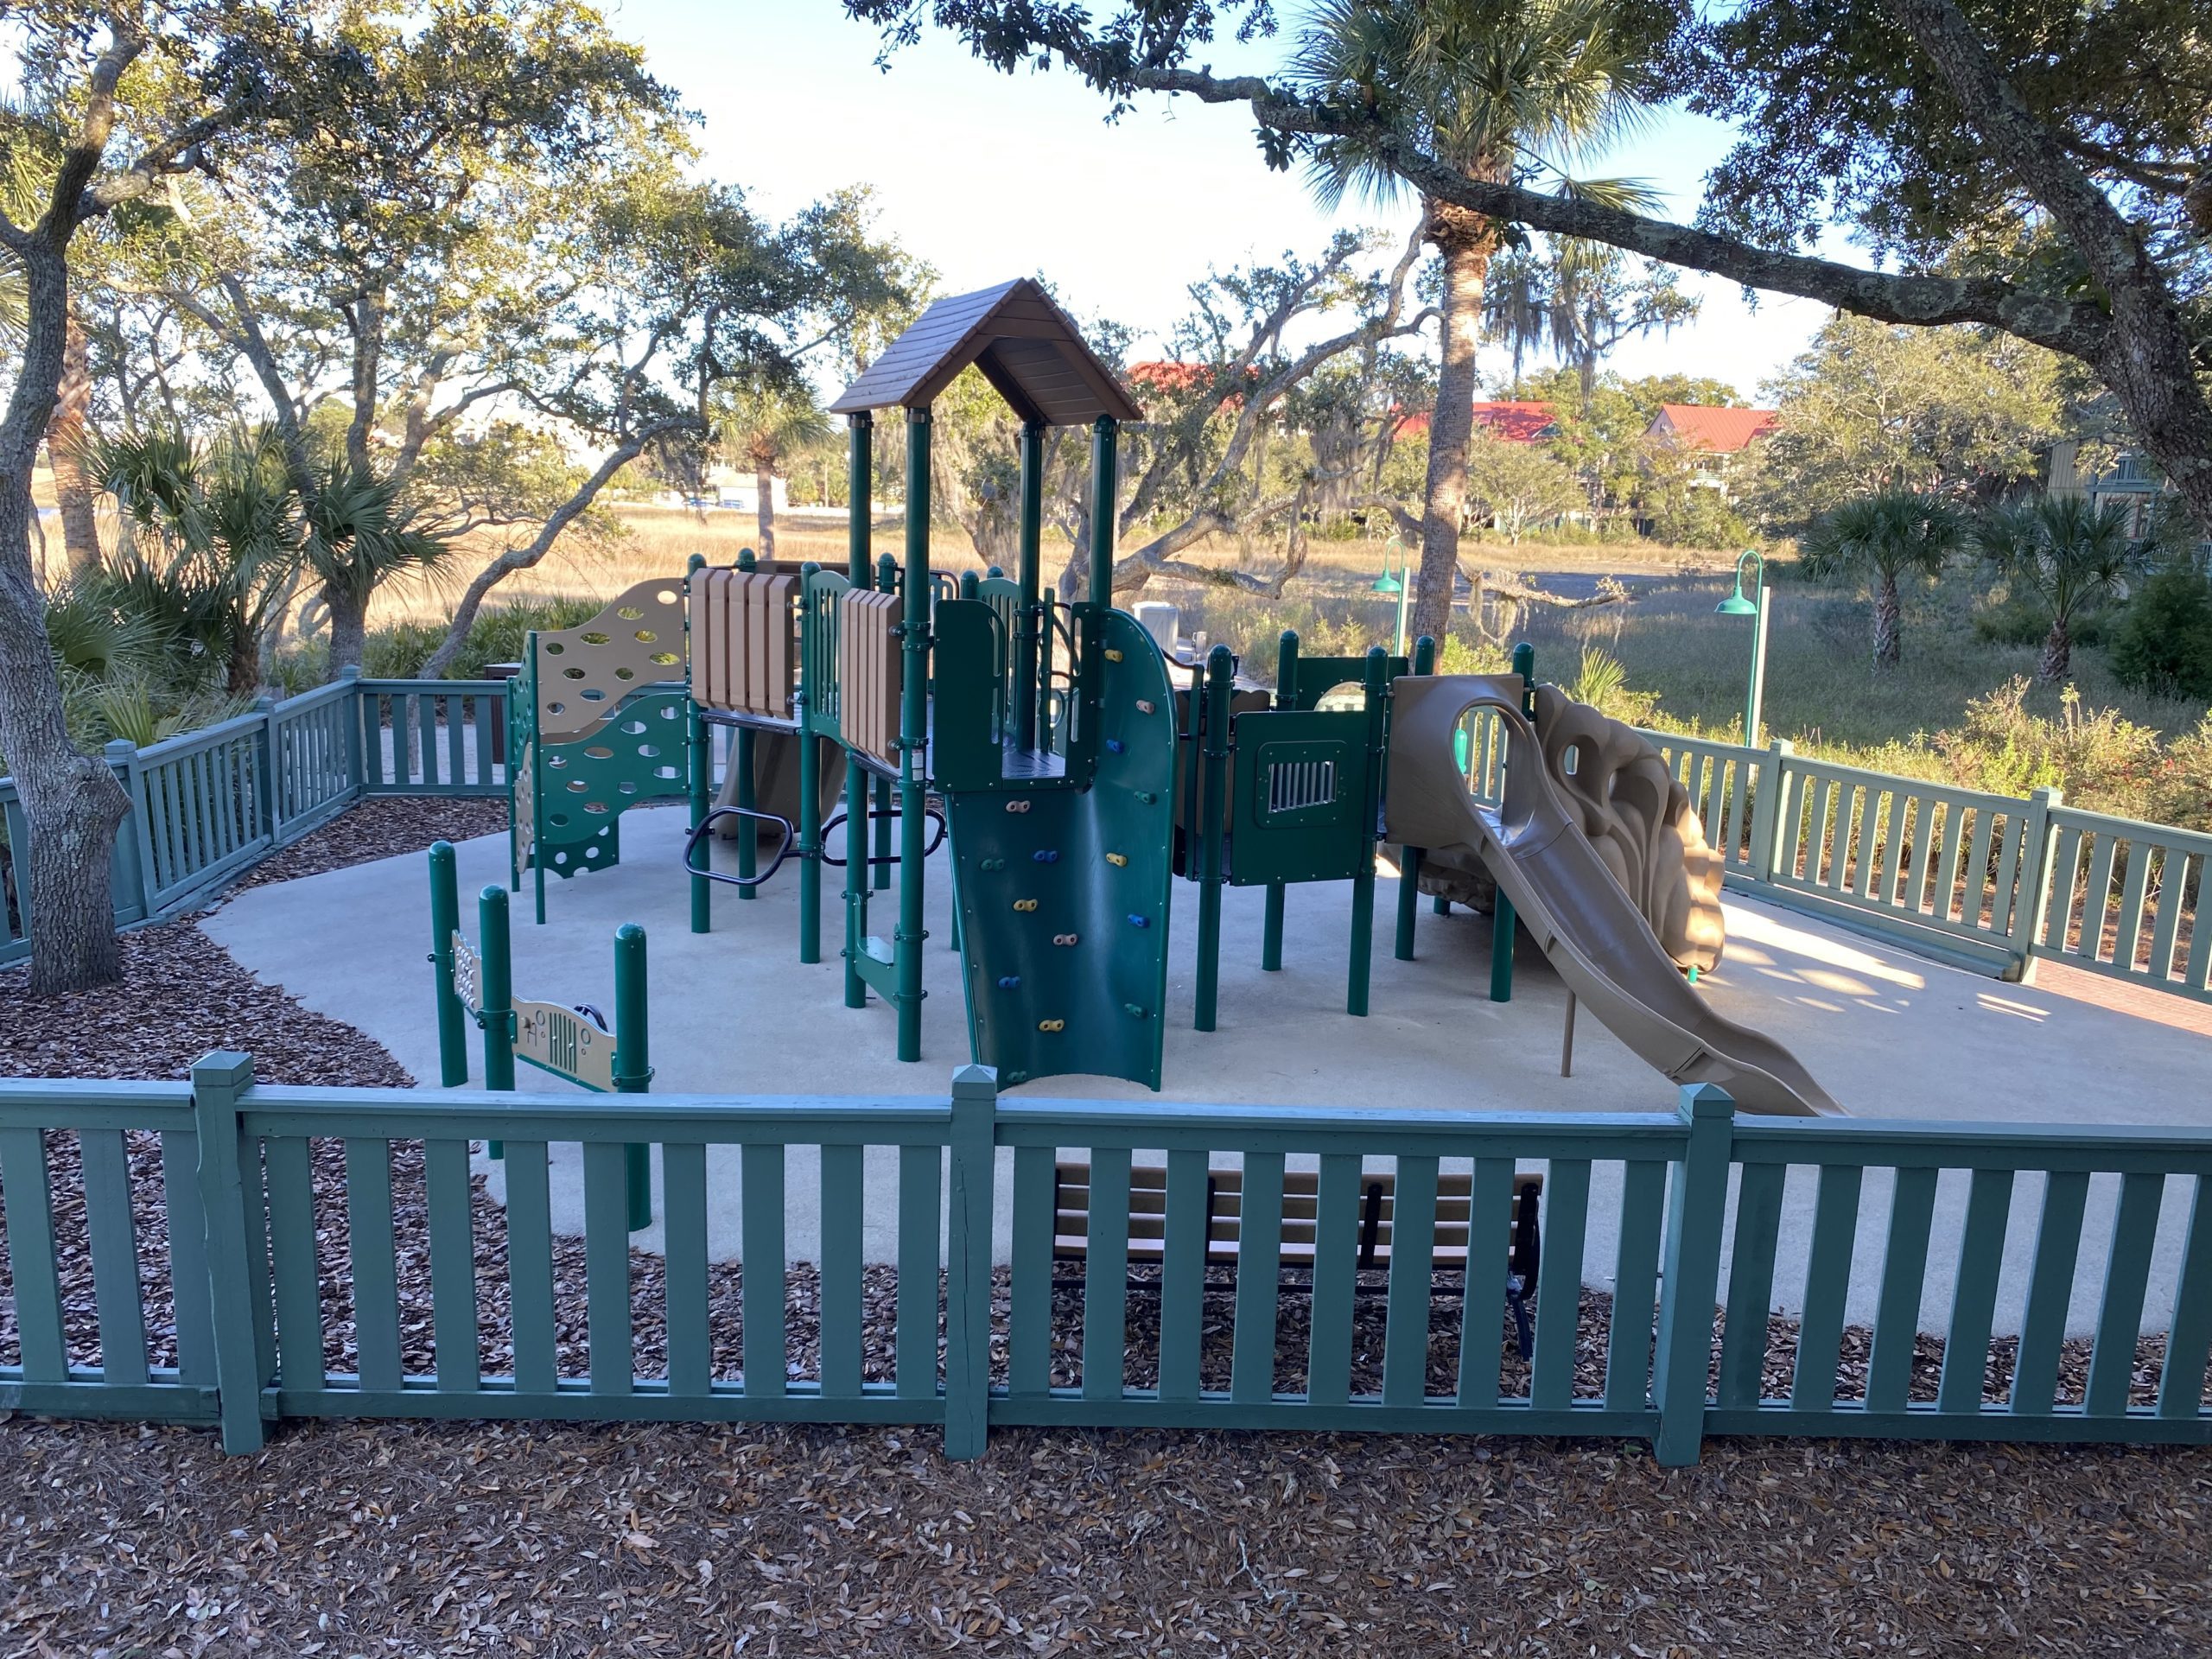 a playground with a fence and trees